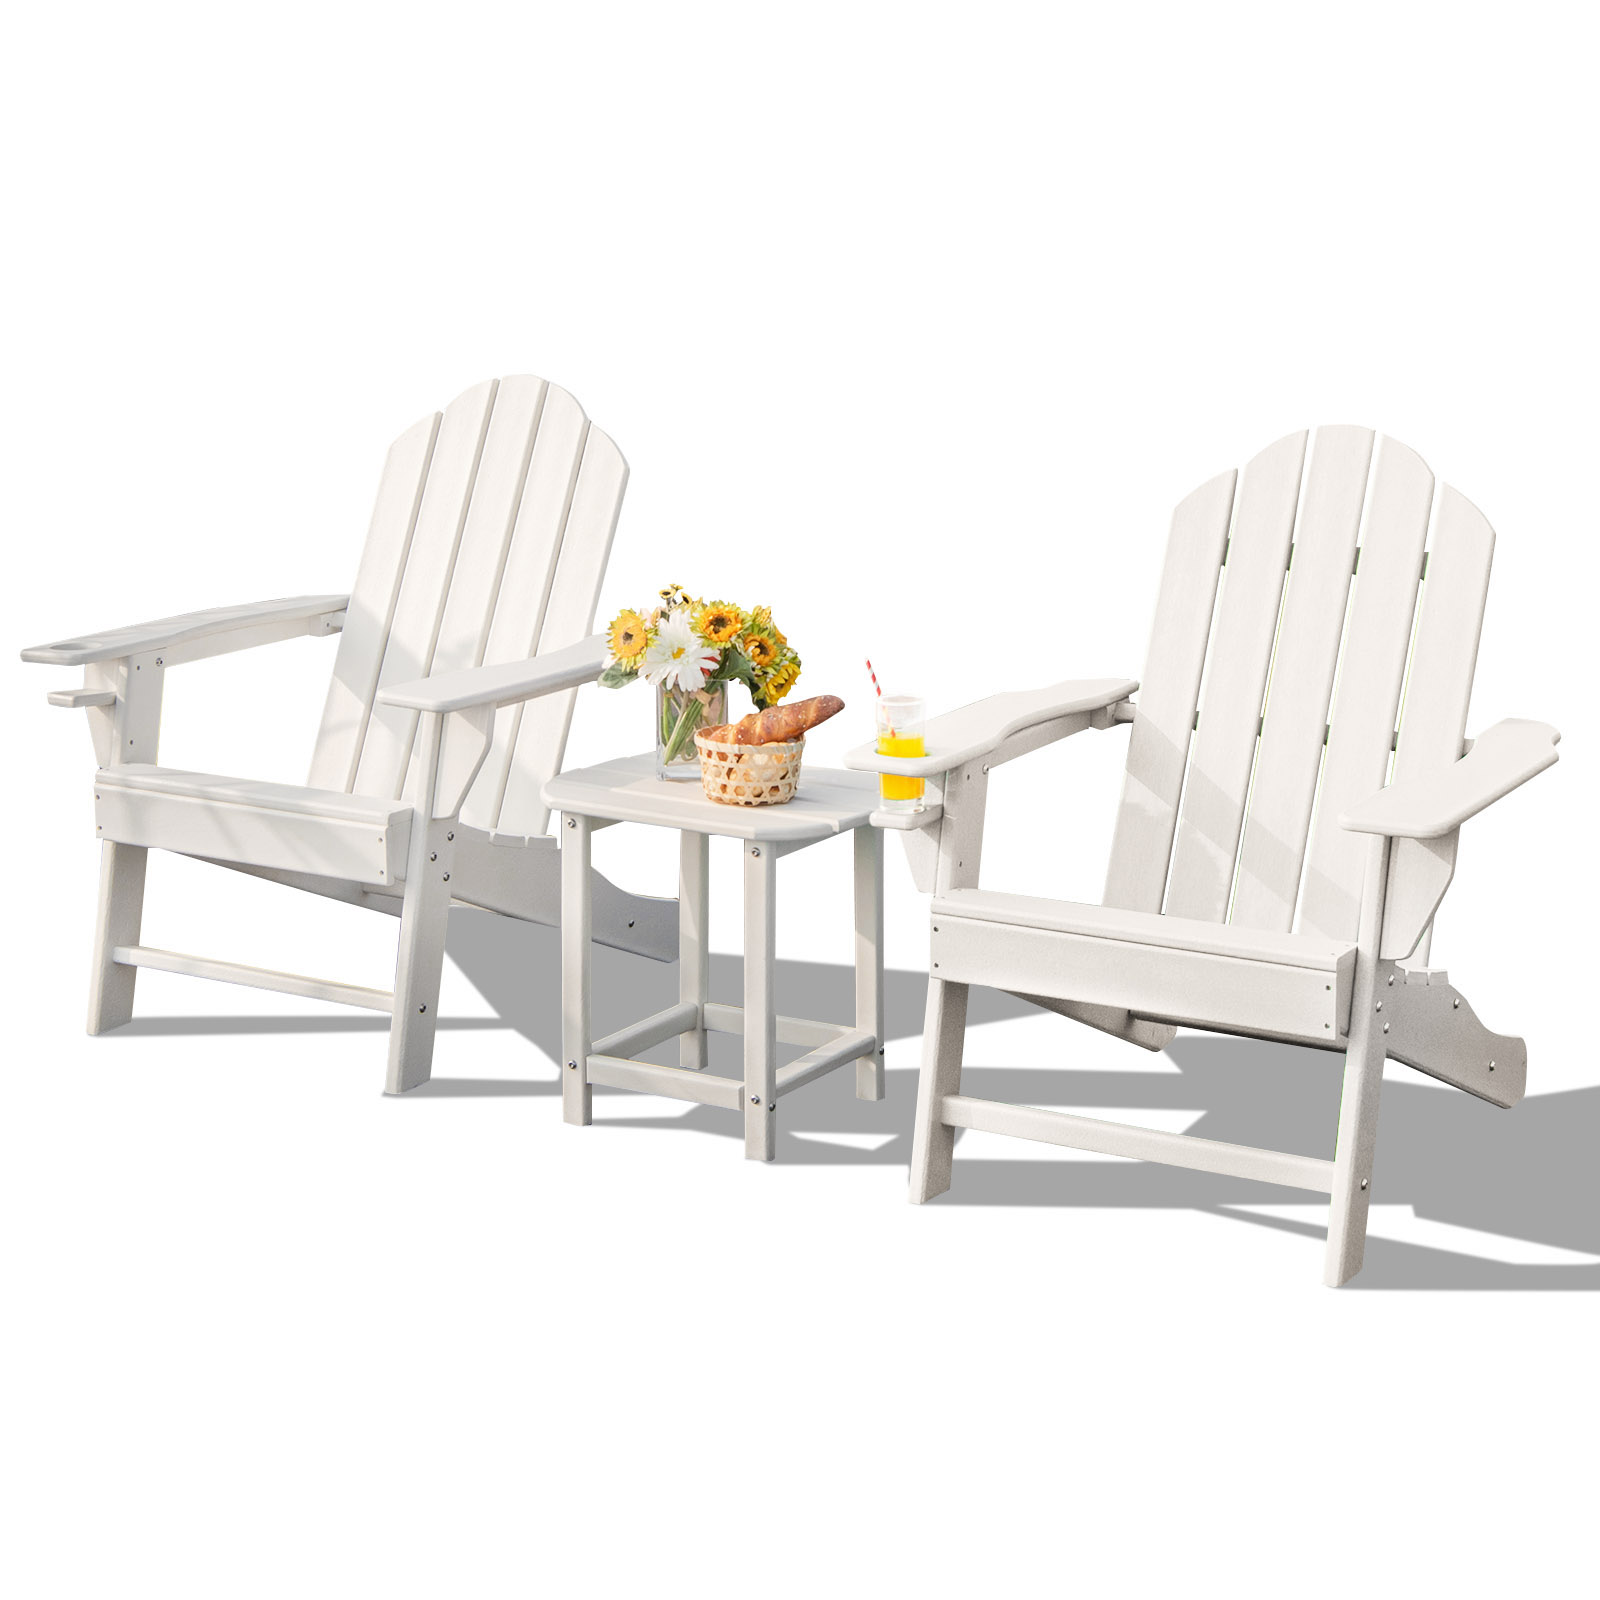 Patiojoy Patio 3PCS Adirondack Chair Side Table Set Outdoor Chair Set with End Table Weather Resistant Cup Holder for Backyard Garden White - image 1 of 7